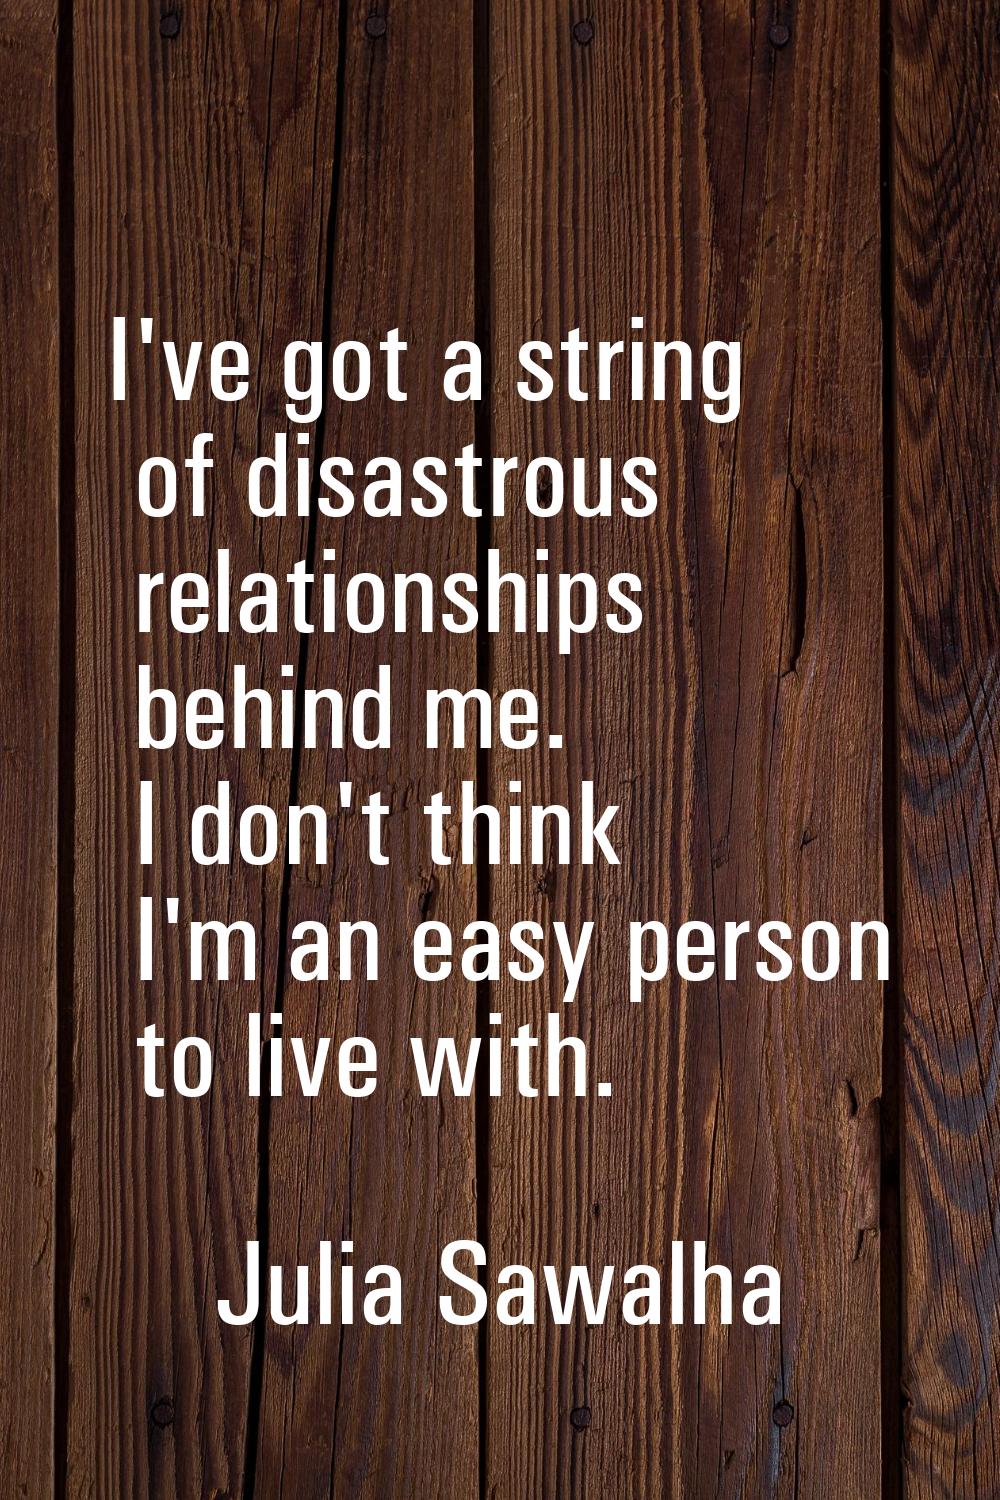 I've got a string of disastrous relationships behind me. I don't think I'm an easy person to live w